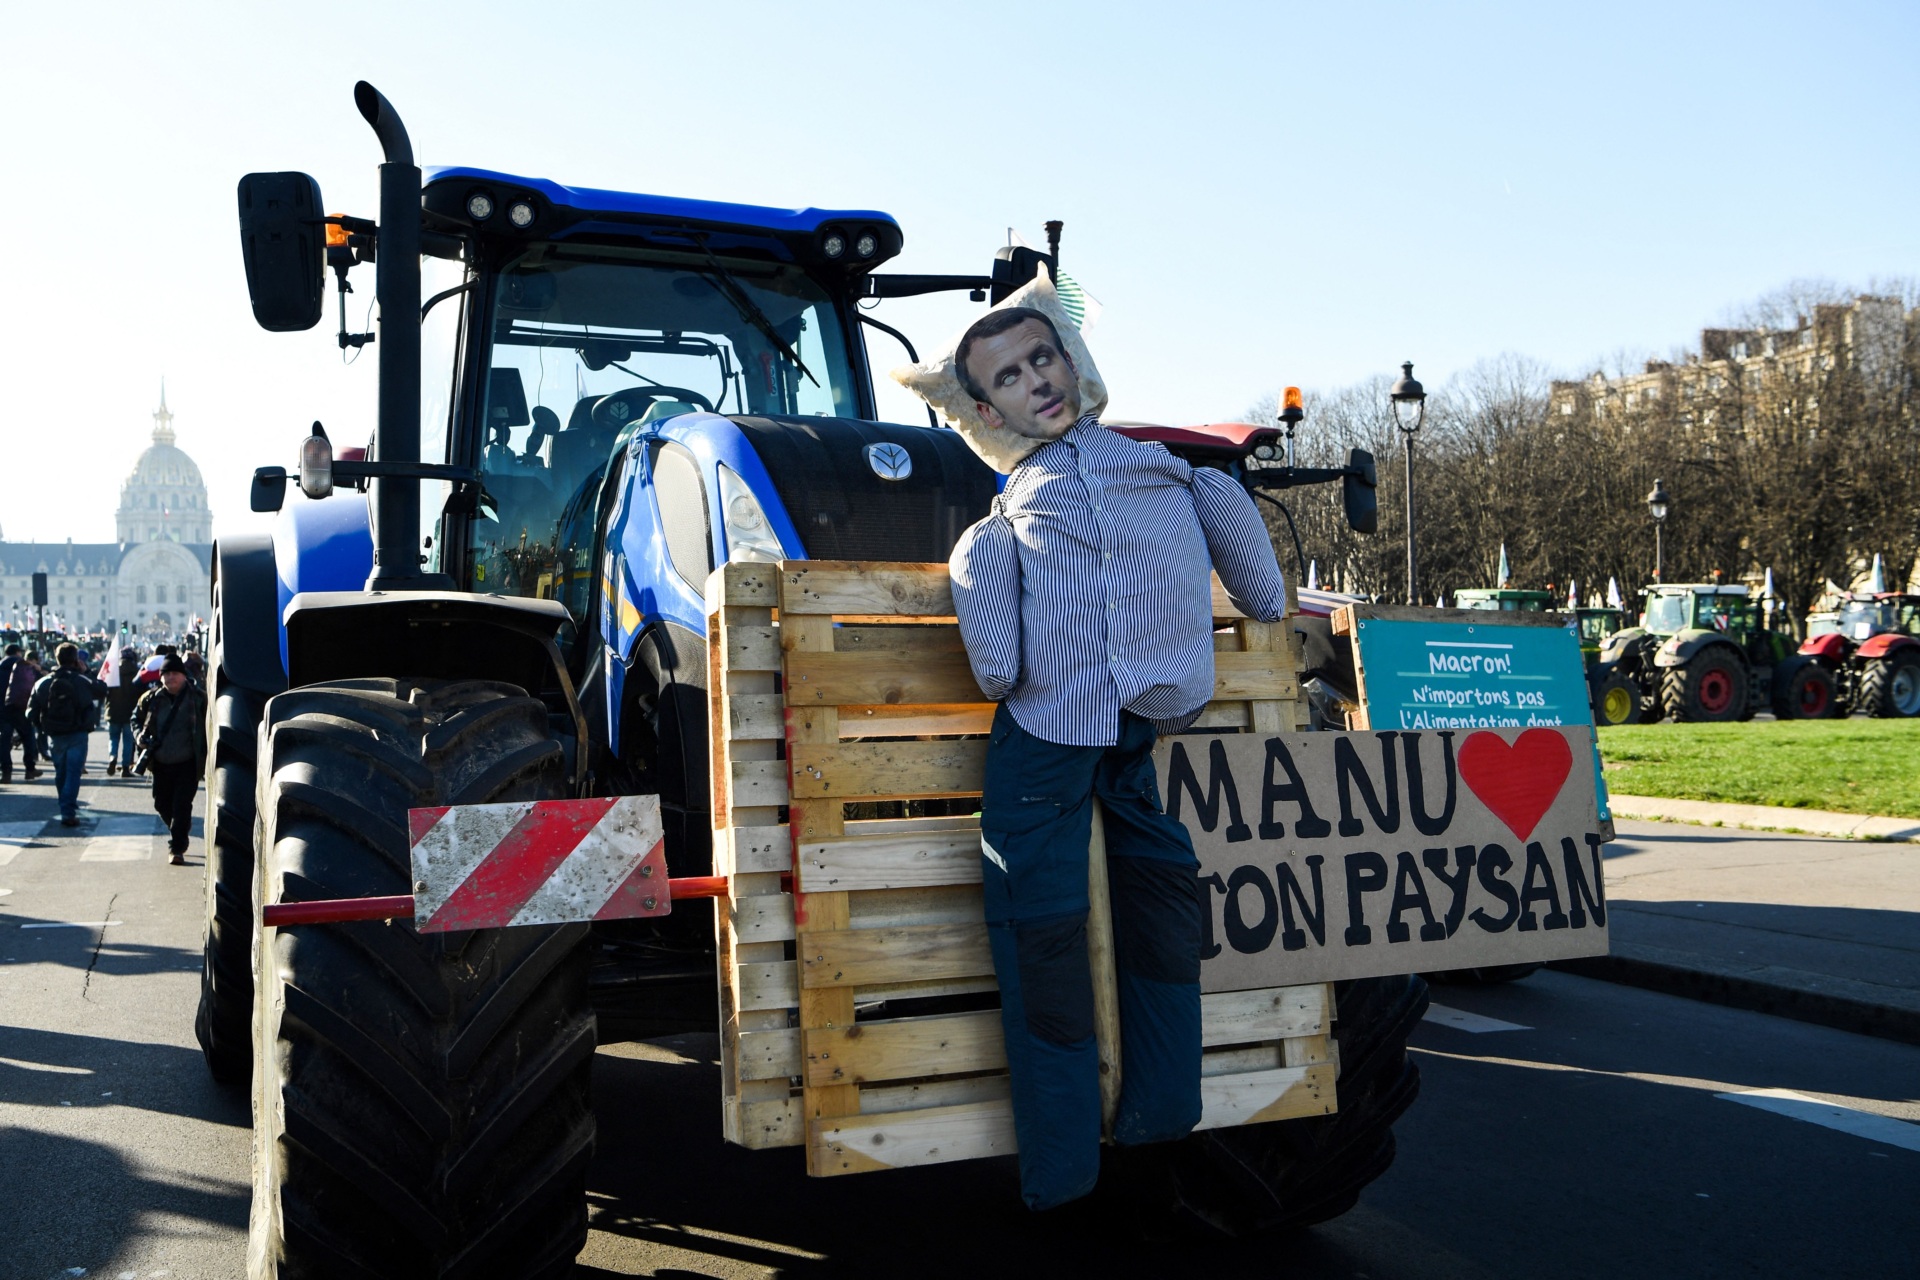 This photograph shows a dummy representing French President Emmanuel Macron with a sign reading "Manu, loves your peasant" on a tractor at the Esplanades des Invalides during a demonstration organised by unions including FNSEA (National Federation of Farmers Union), against "obligations" in agriculture, in particular restrictions on the use of pesticides, in Paris, on February 8, 2023. (Photo by Bertrand GUAY / AFP) (Photo by BERTRAND GUAY/AFP via Getty Images)